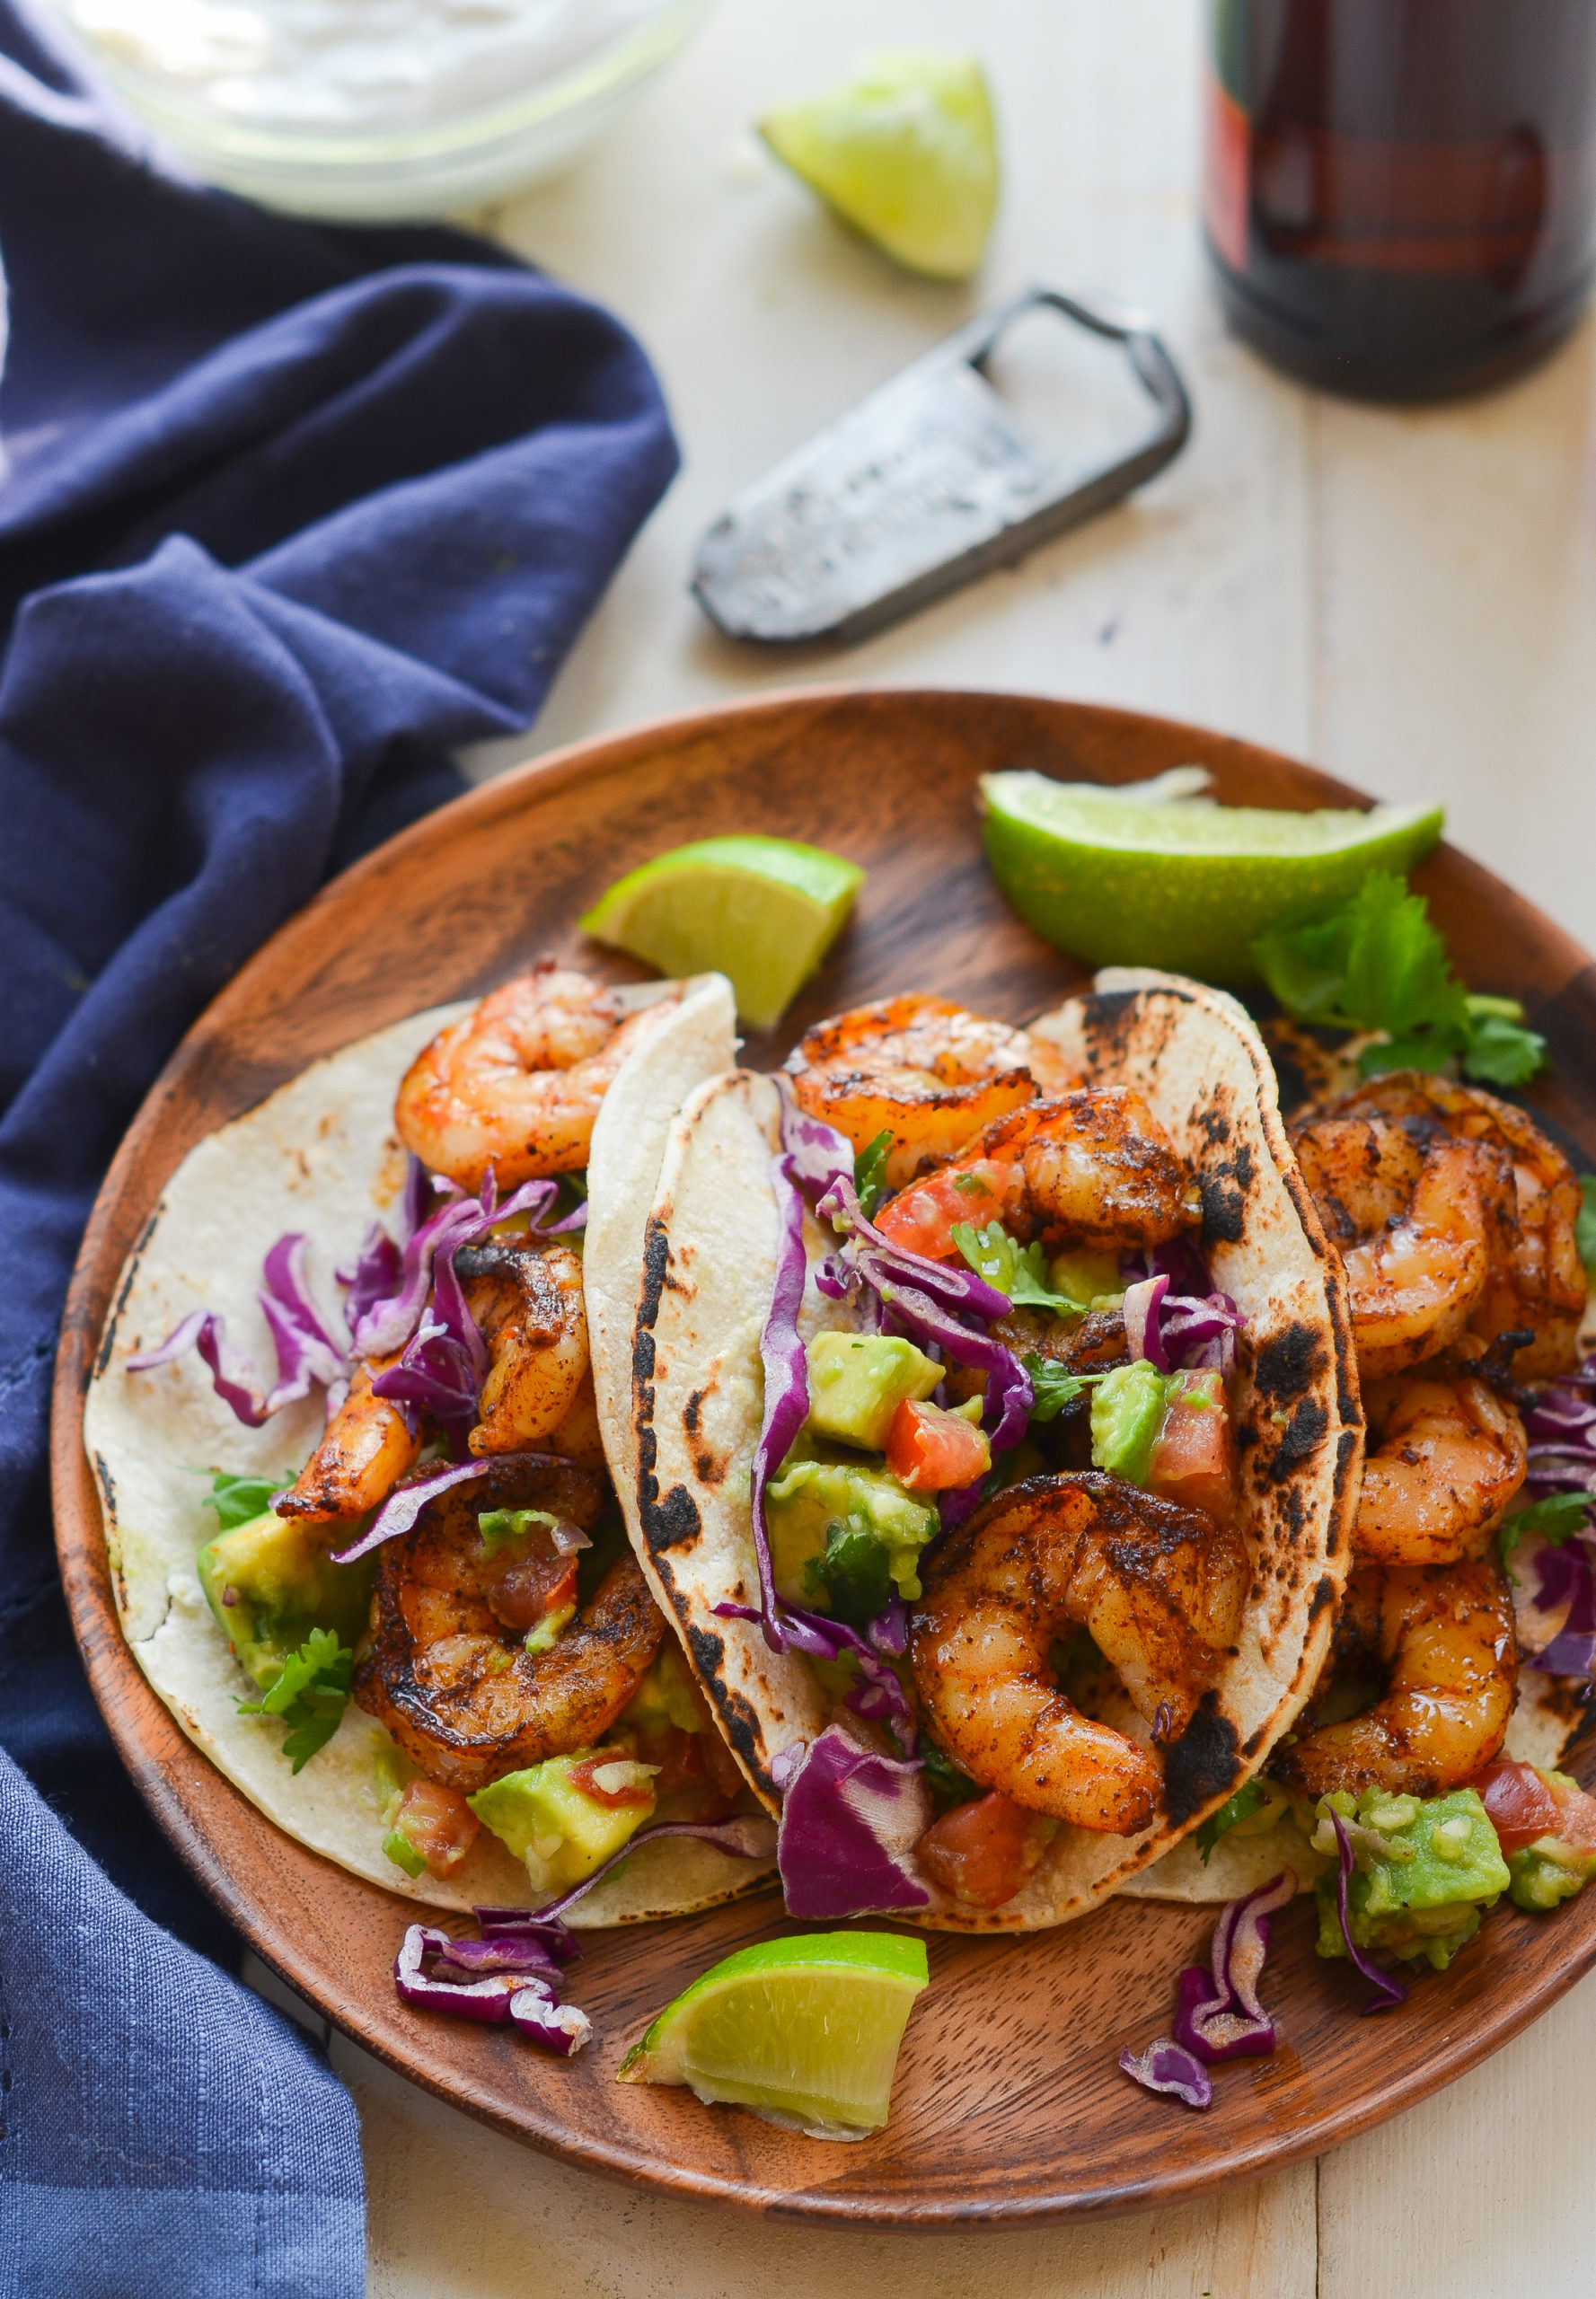 Grilled Shrimp Tacos With Avocado Salsa Once Upon A Chef,How To Make A Balloon Dog Step By Step